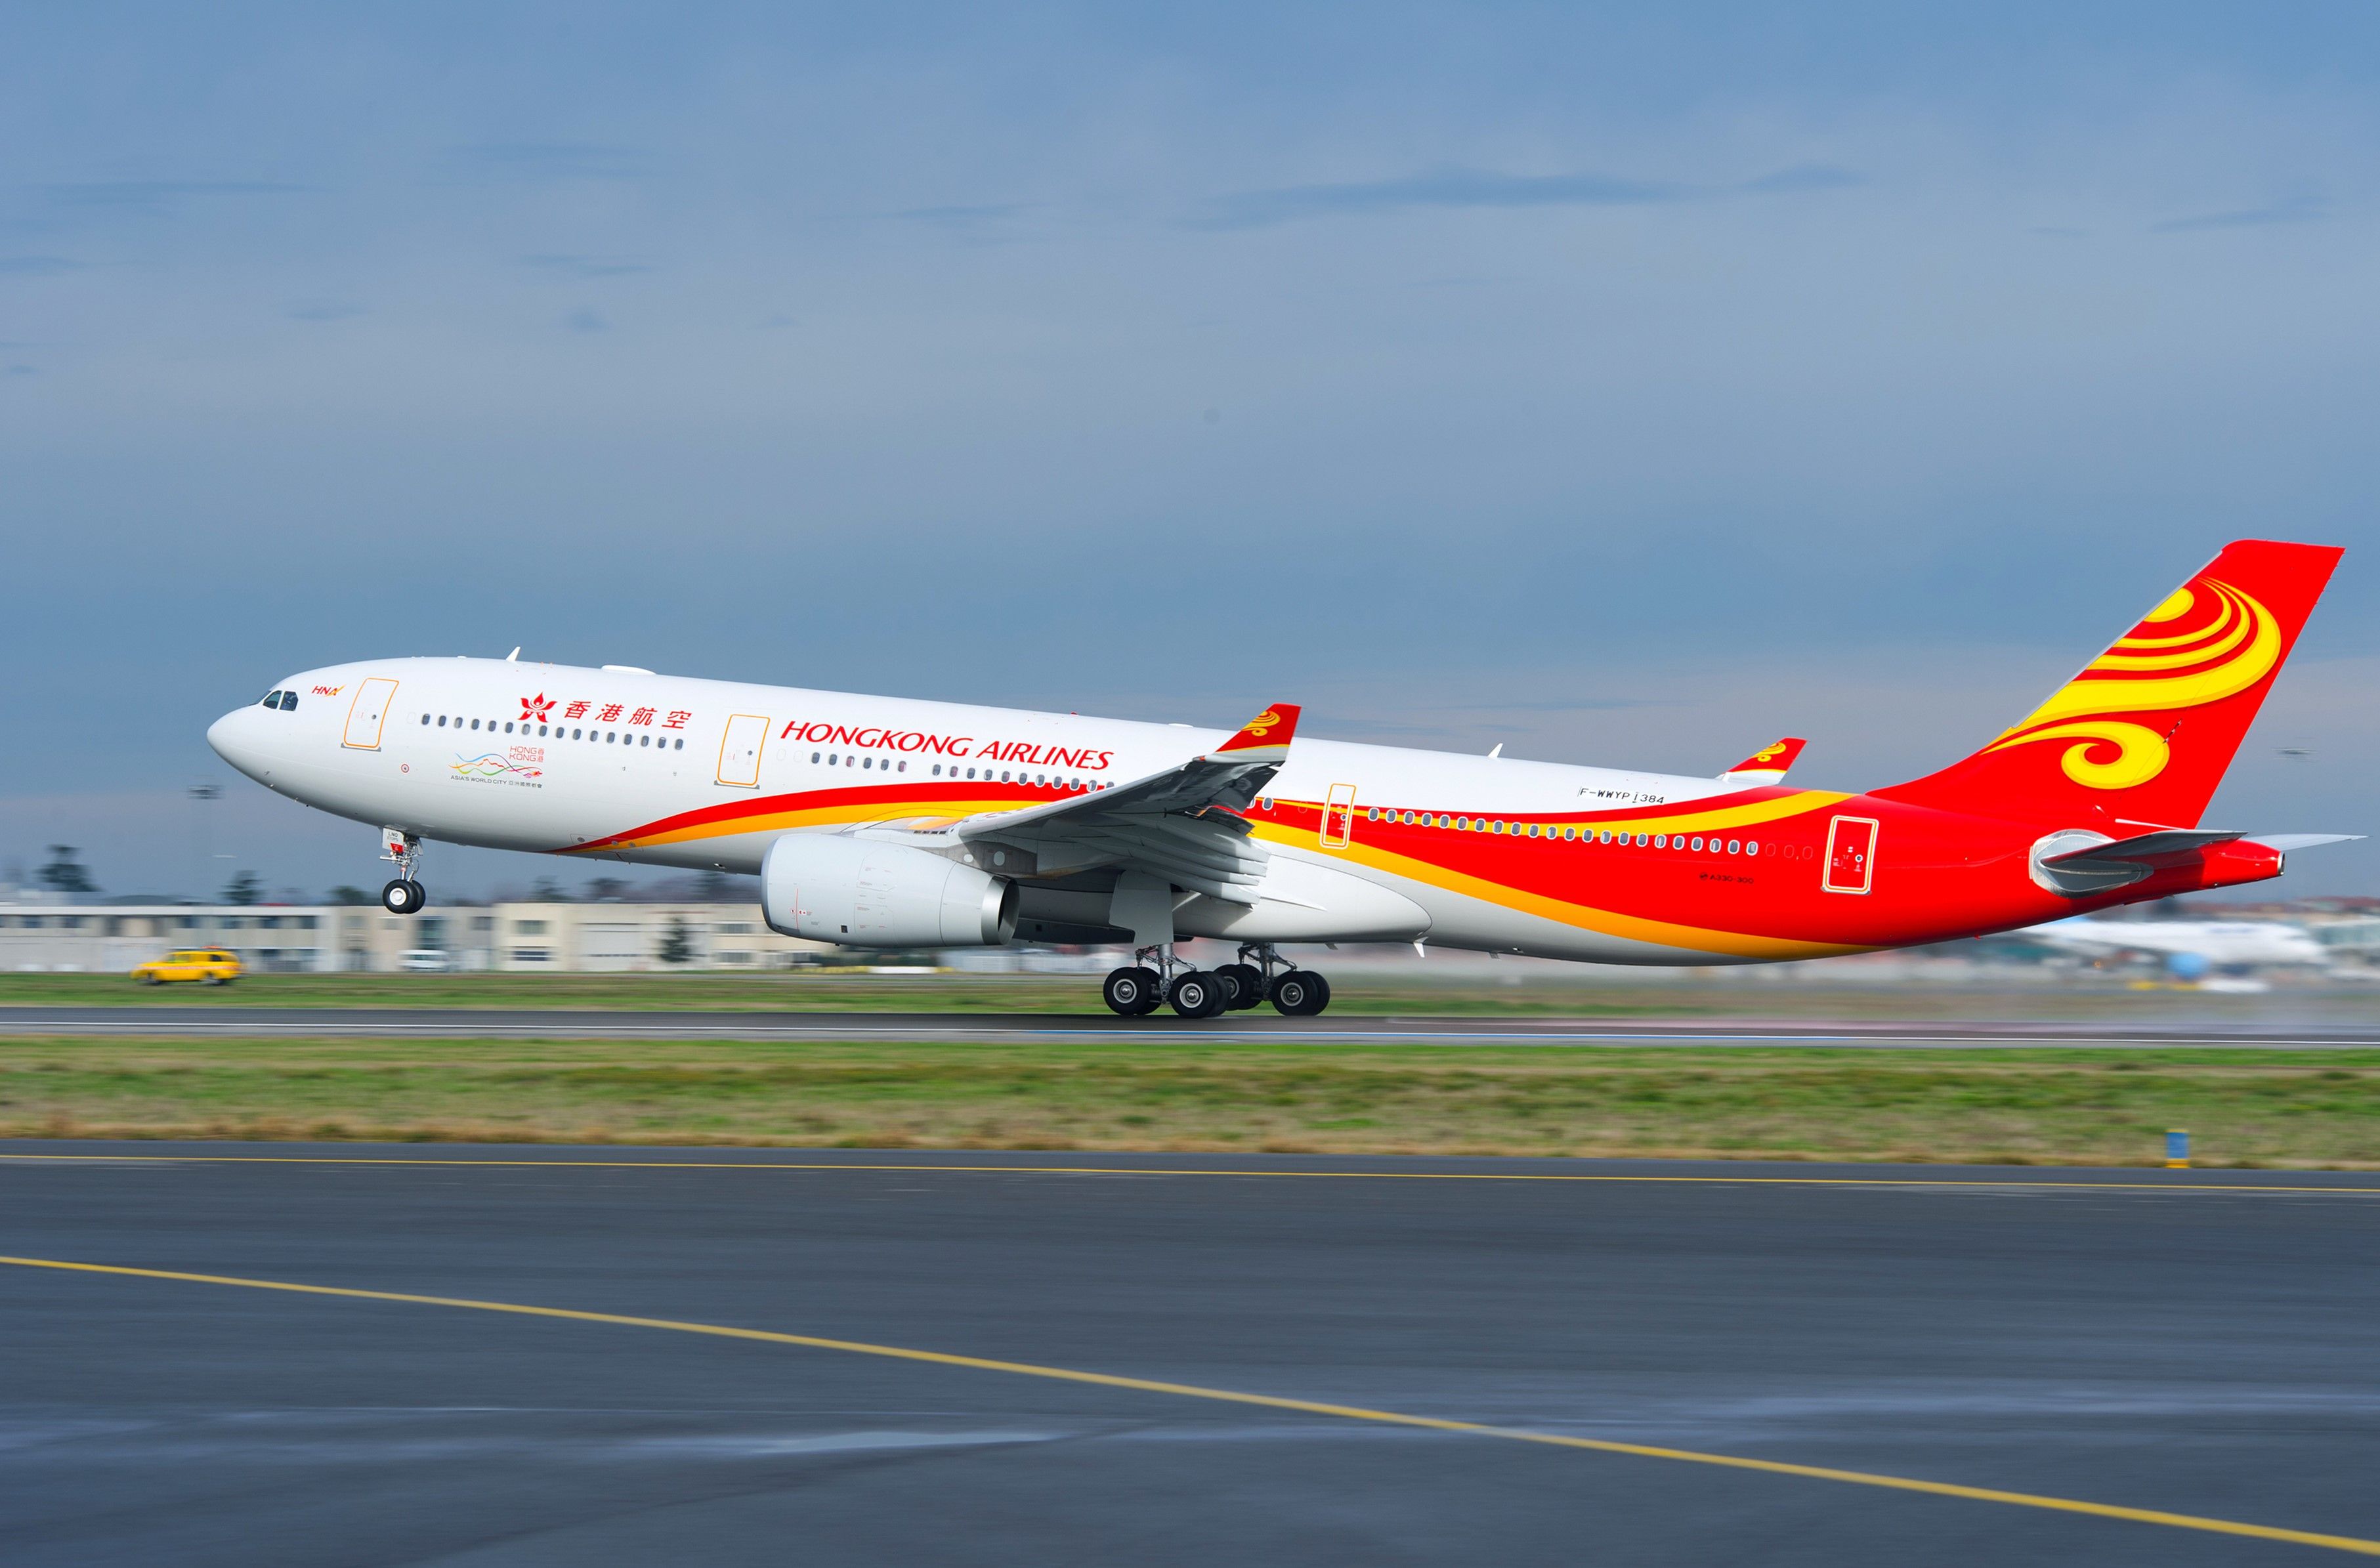 Hong Kong Airlines Is Expanding Its Airbus A330 Fleet